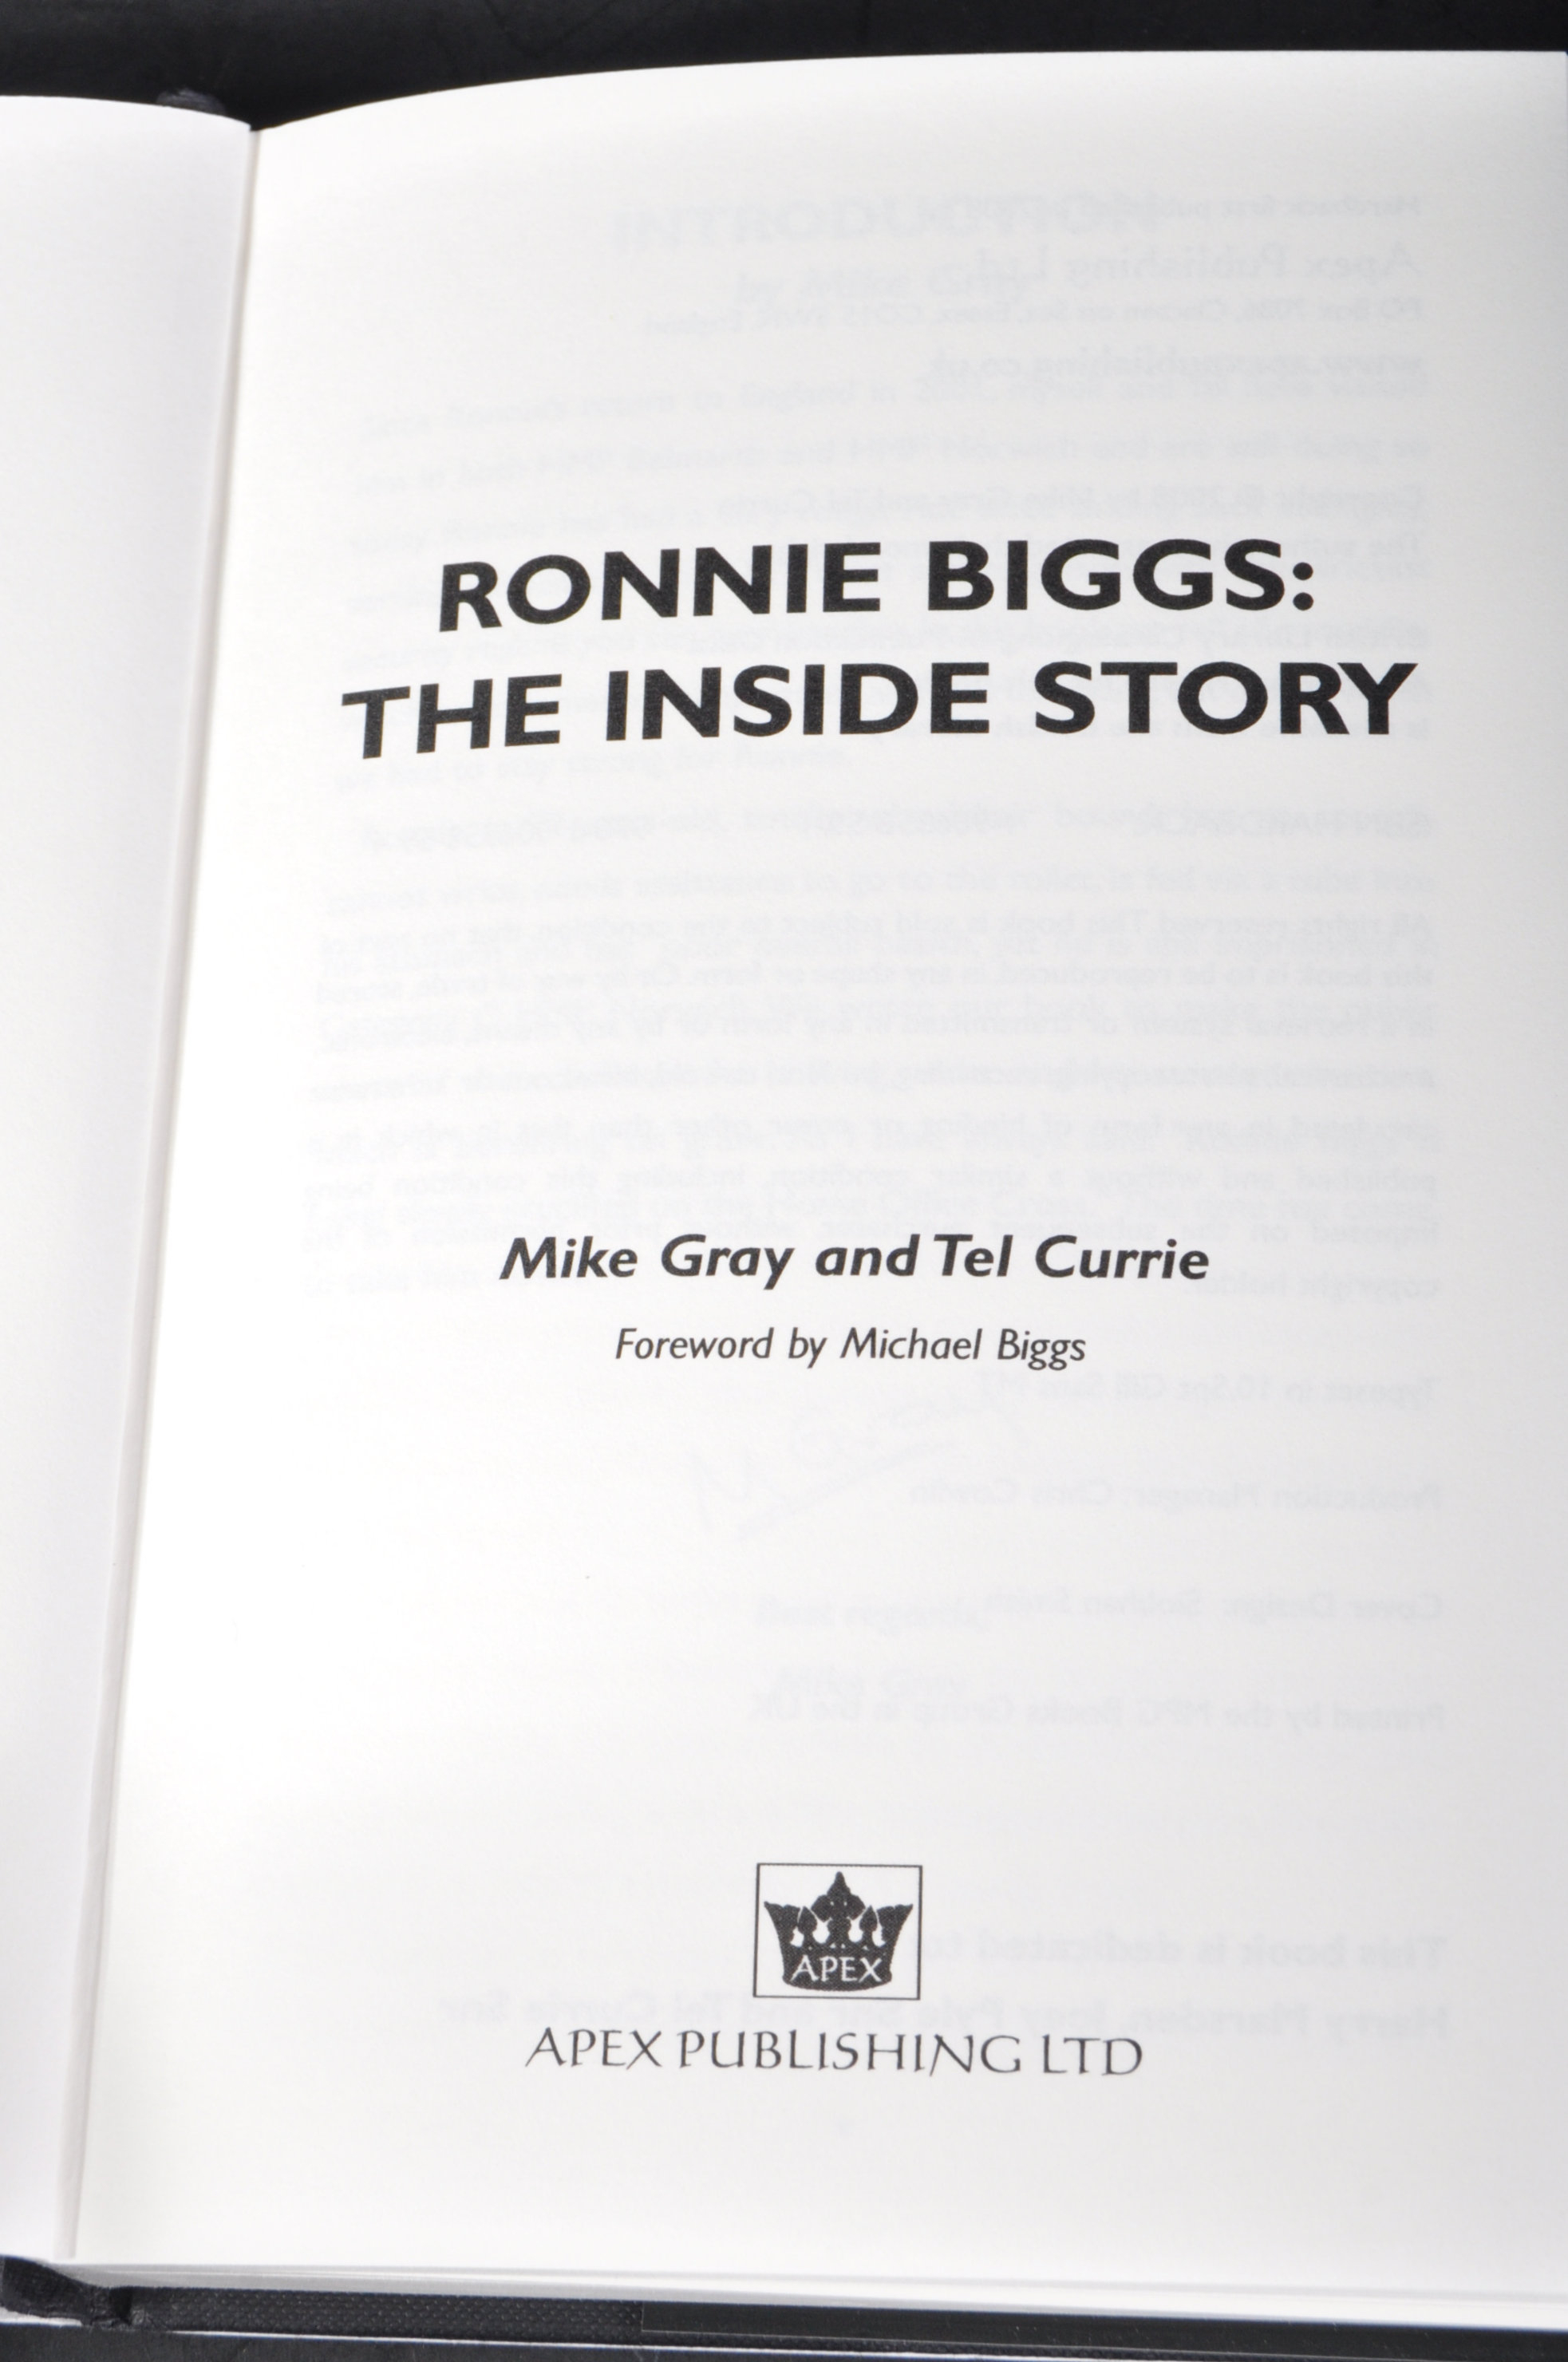 GREAT TRAIN ROBBERY - RONNIE BIGGS THE INSIDE STORY SIGNED - Image 4 of 6